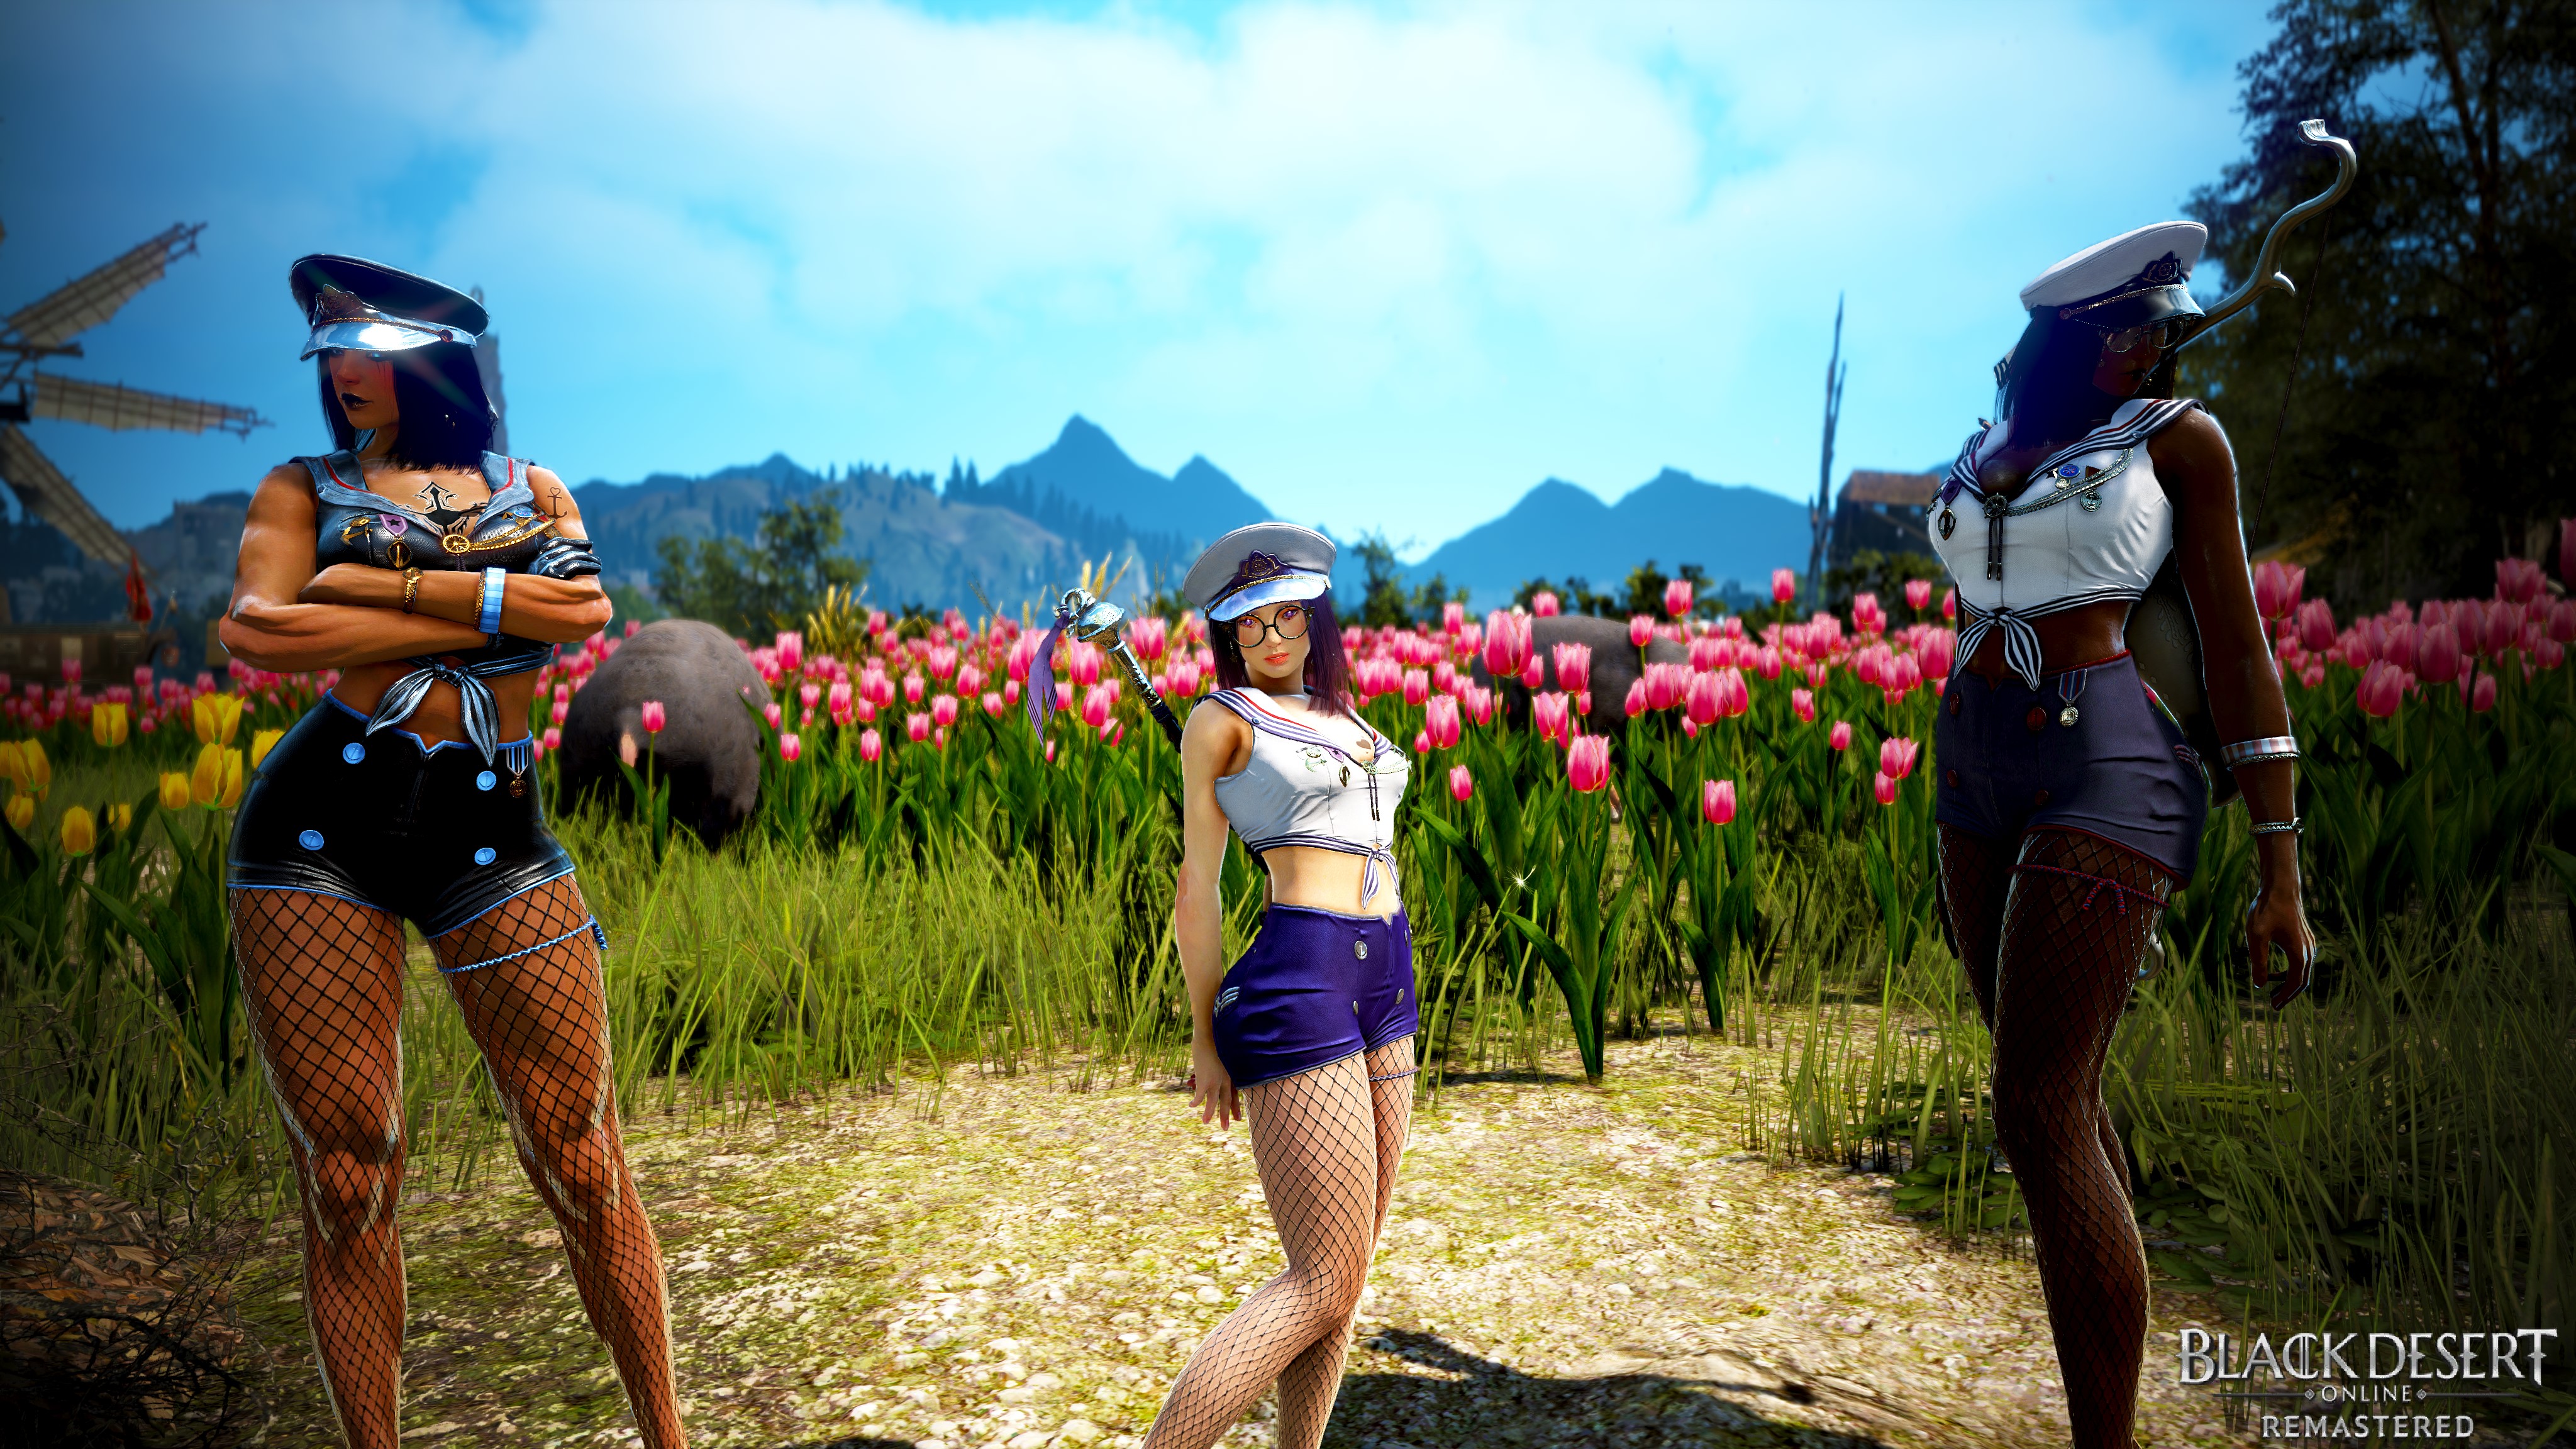 General 4096x2304 Black Desert Online video game art video game characters video game girls screen shot tulips rose landscape navy thighs thigh high socks cleavage curvy stockings fantasy girl fantasy art